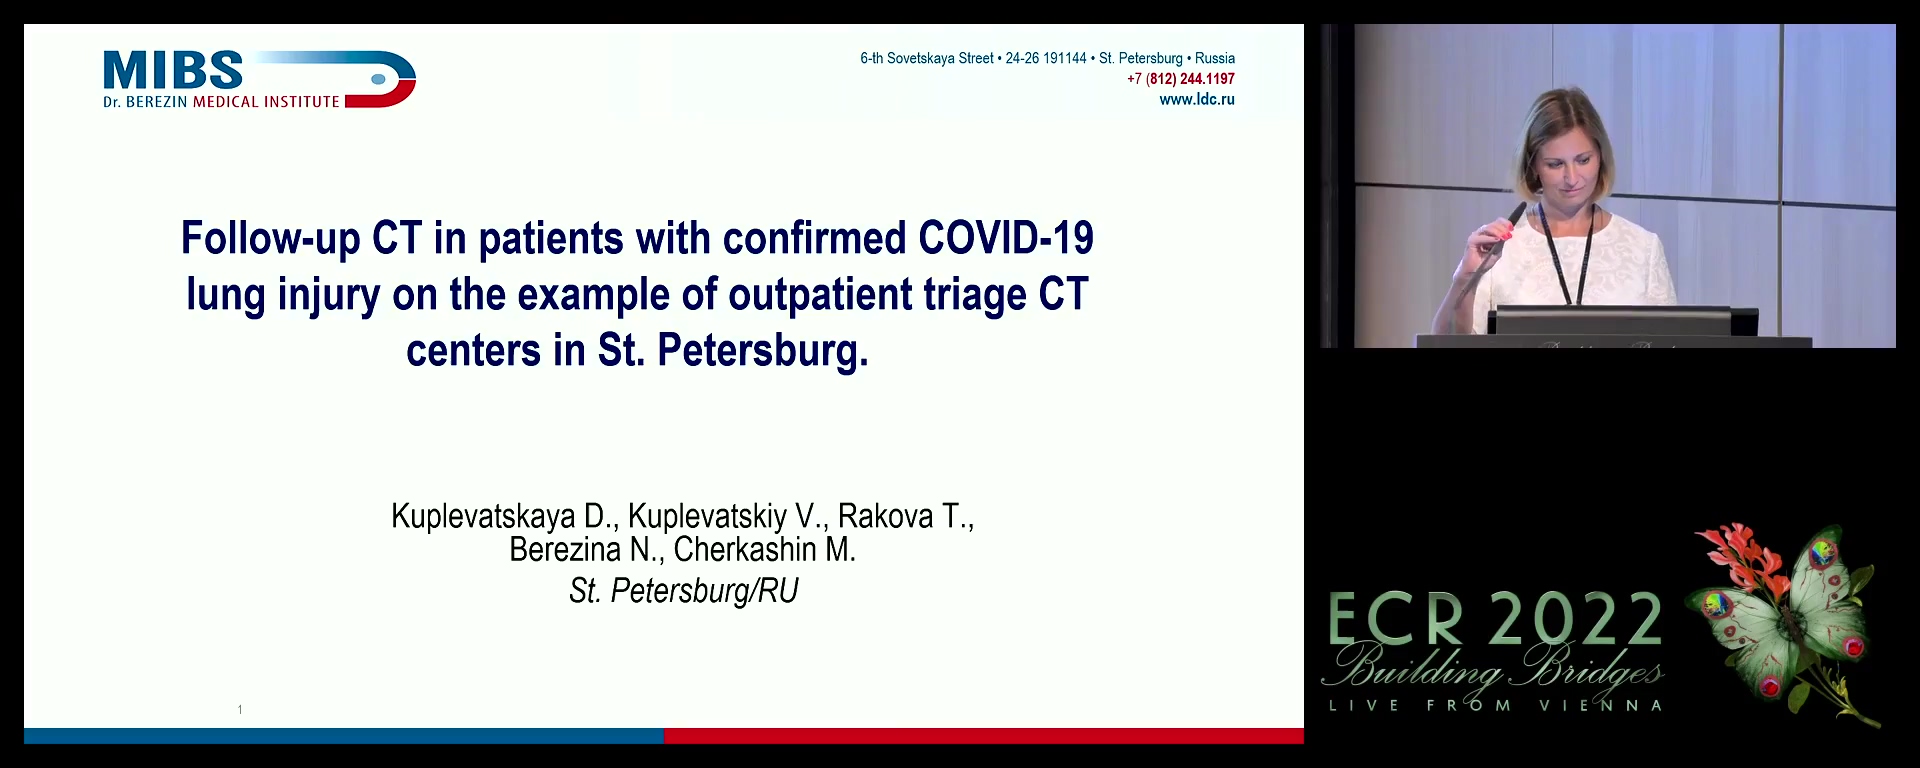 Follow-up CT in patients with confirmed COVID-19 lung injury on the example of outpatient triage CT centres in St. Petersburg